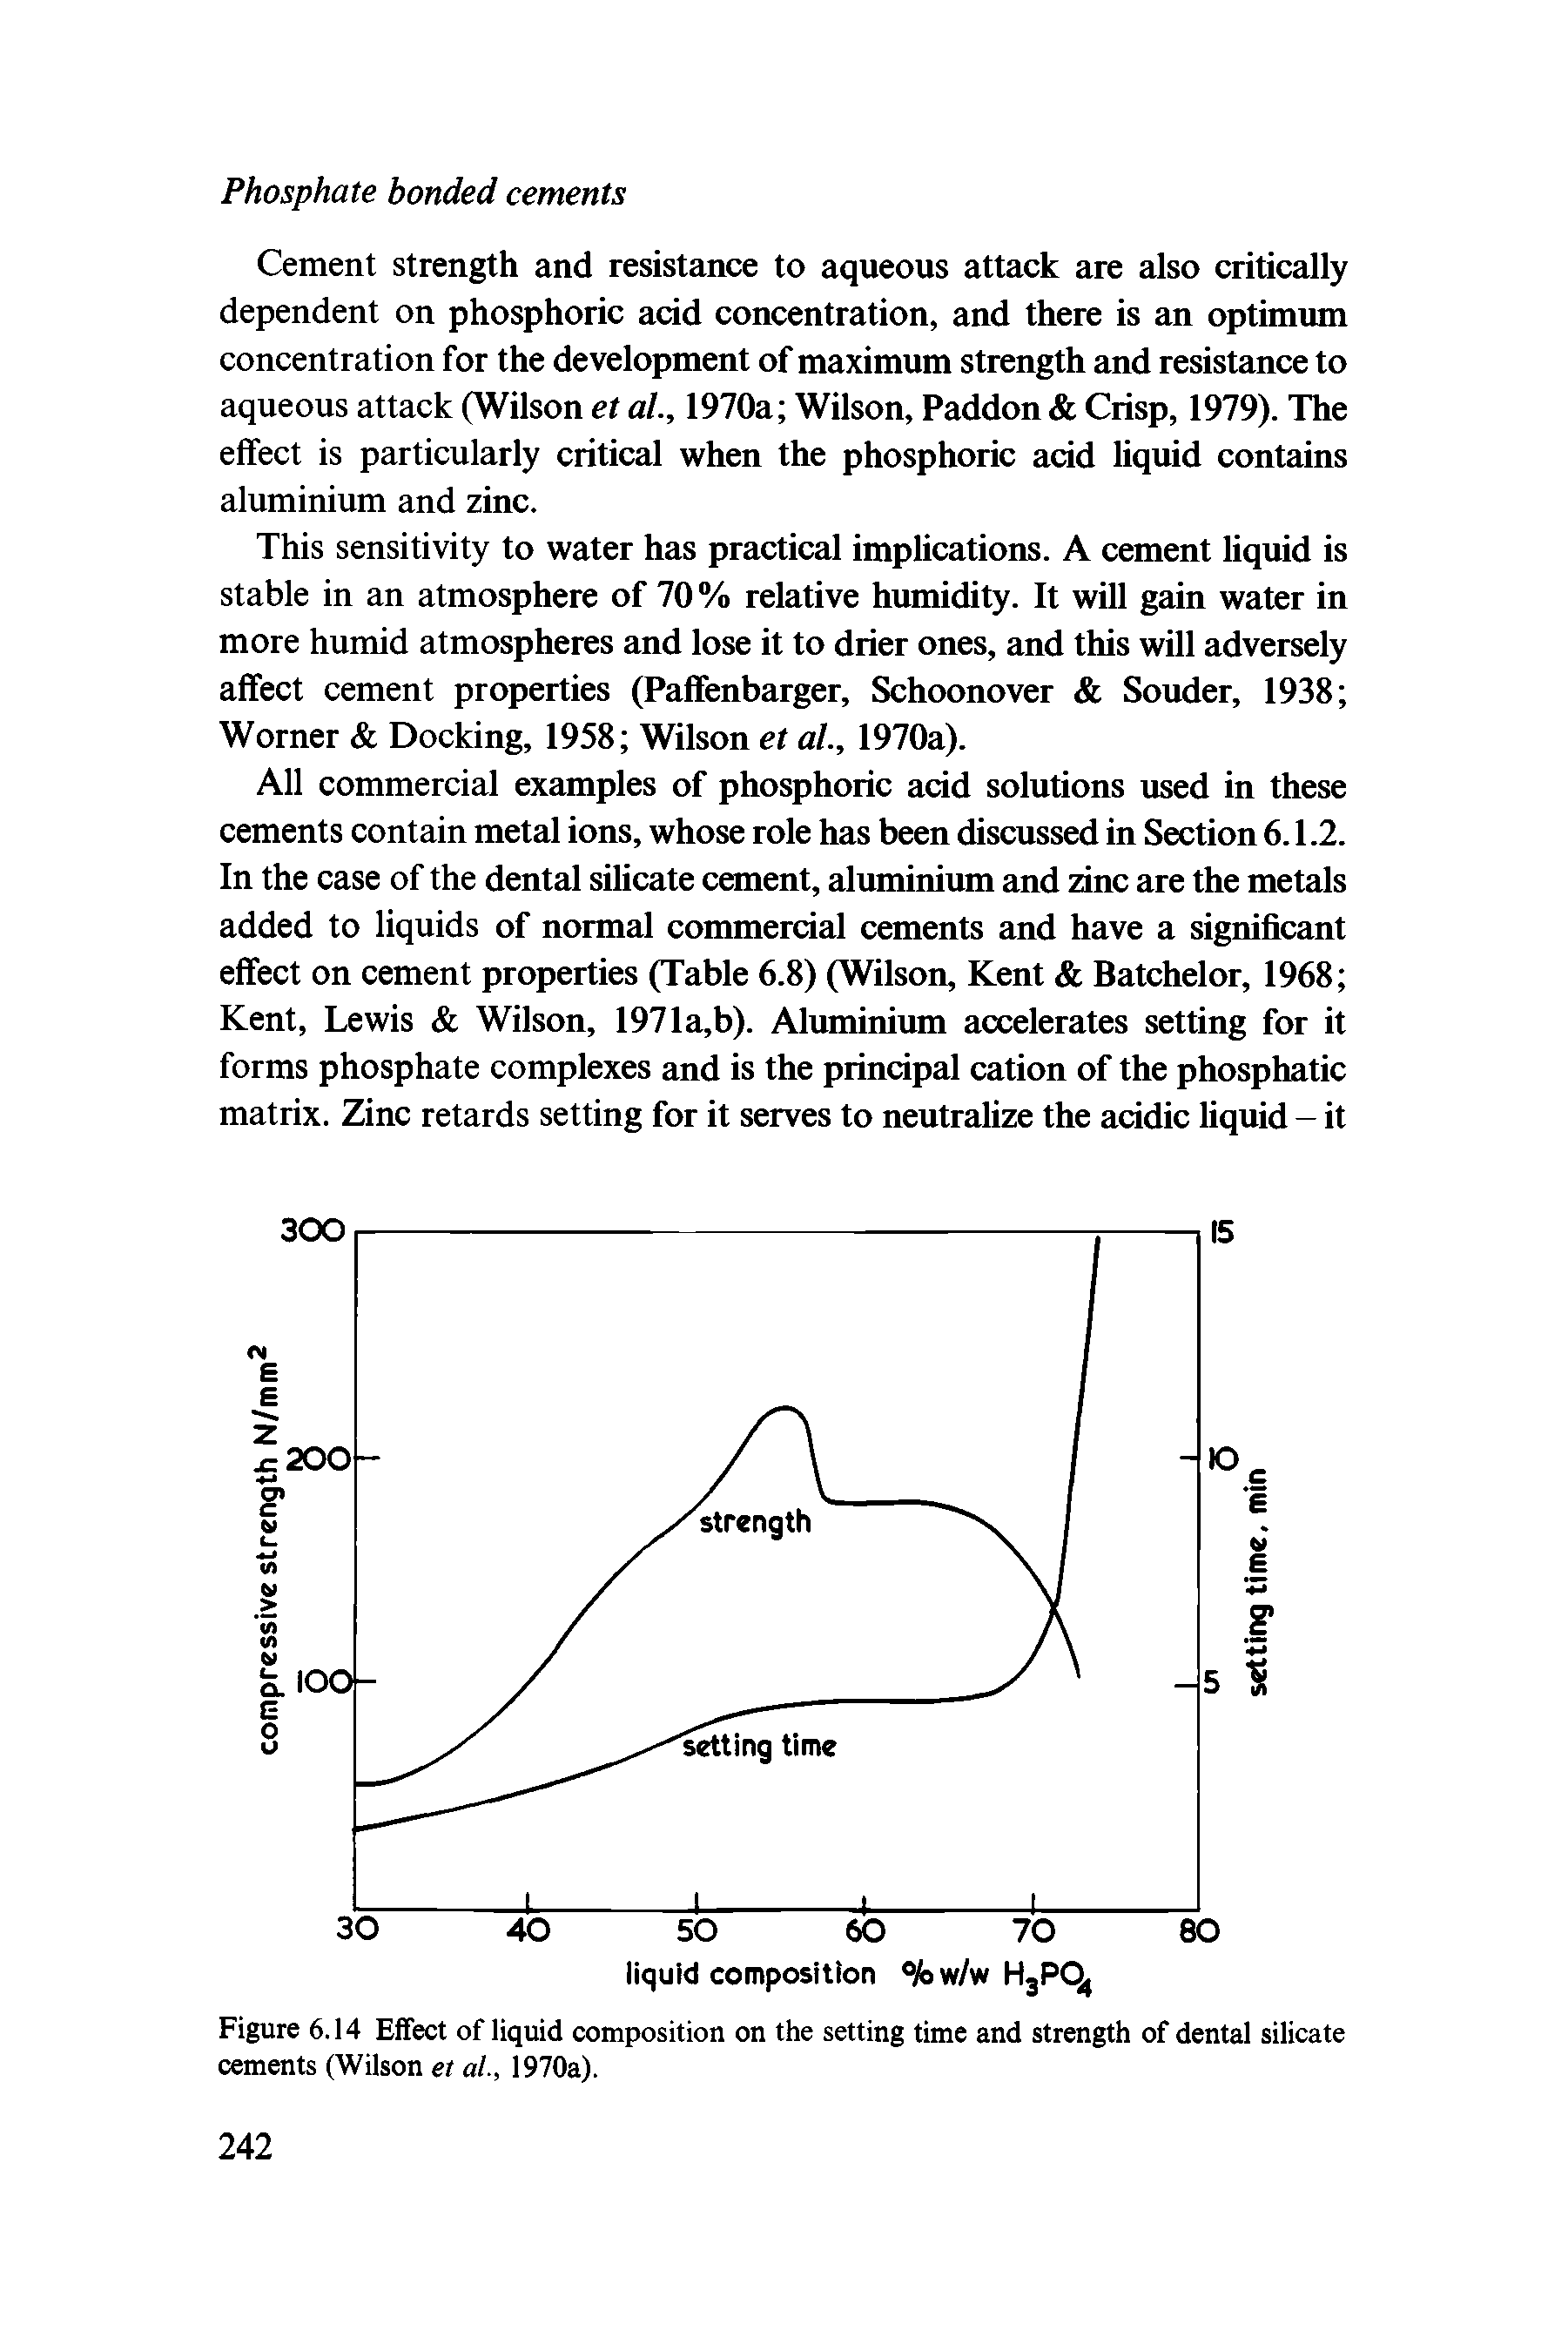 Figure 6.14 Effect of liquid composition on the setting time and strength of dental silicate cements (Wilson et al, 1970a).